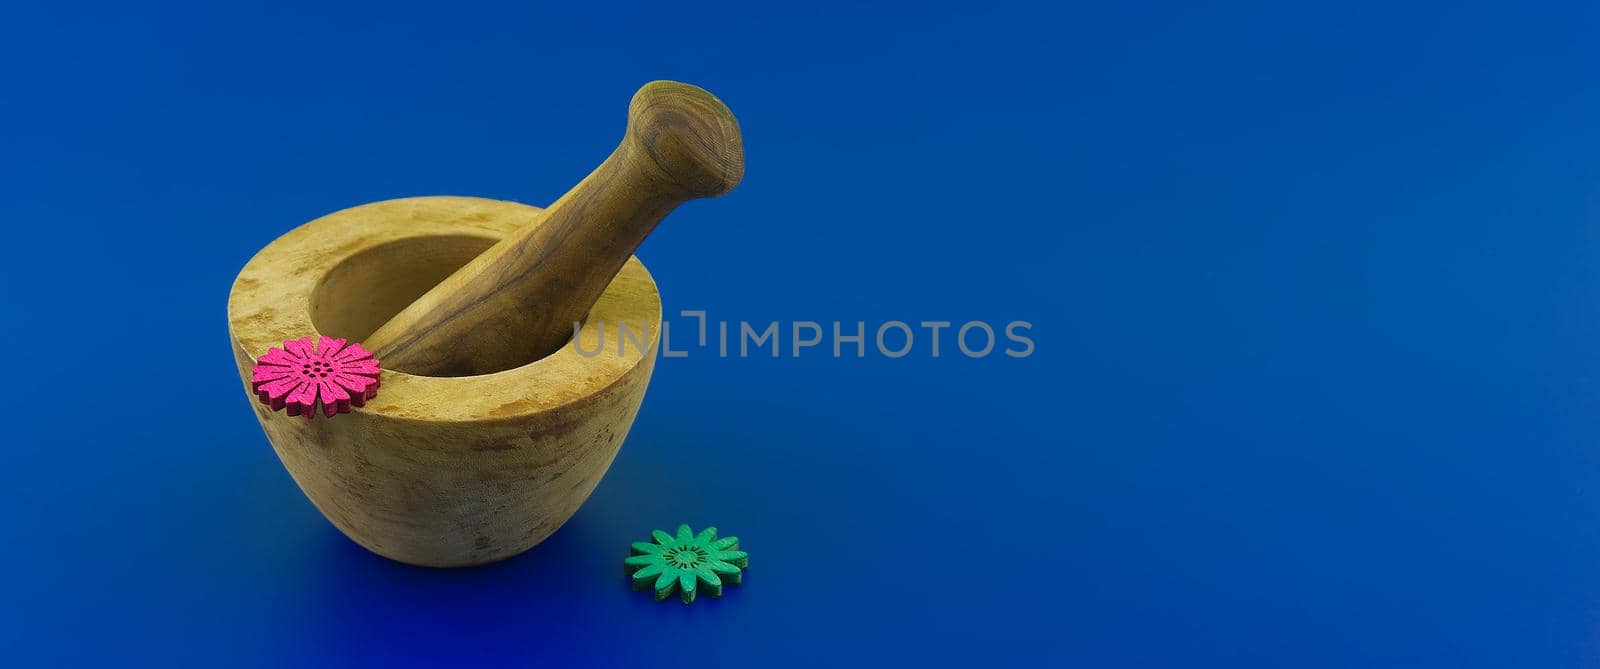 Spices and herb grinder over blue background by NetPix